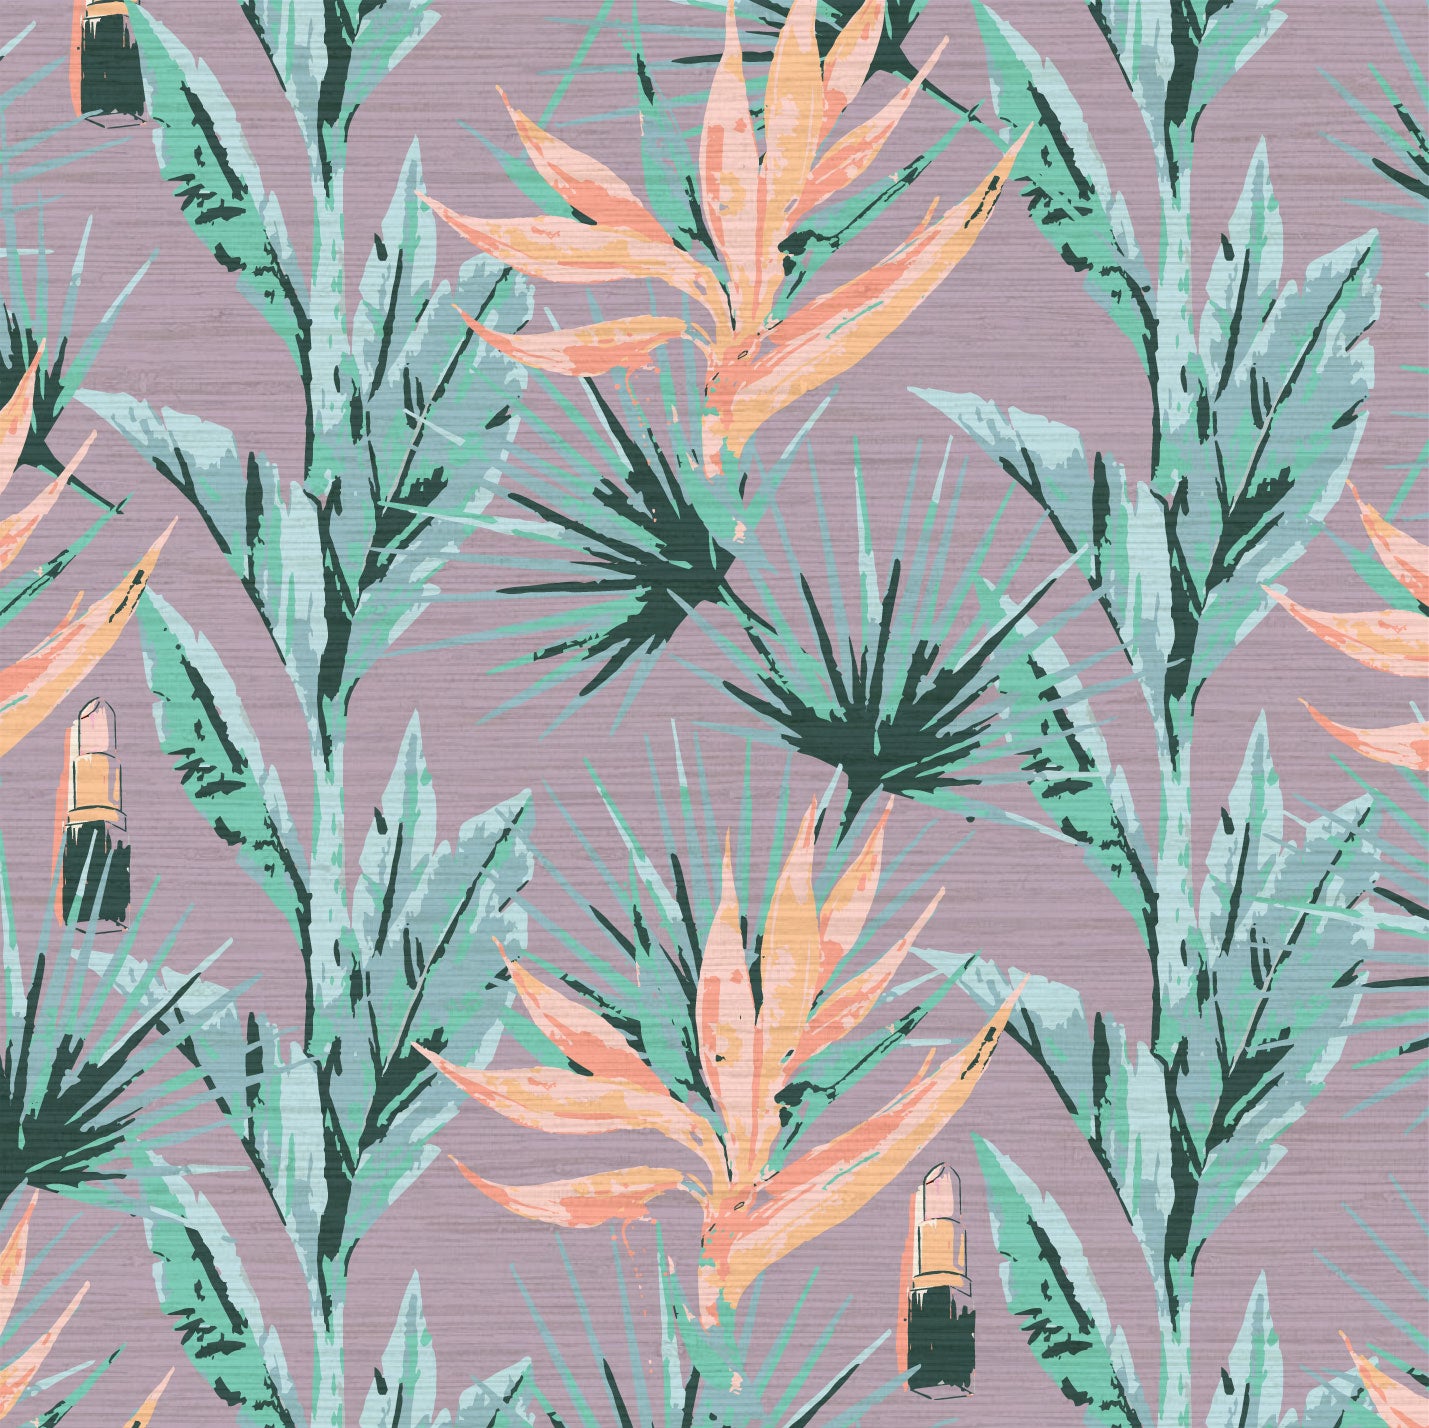 light purple based allover floral print with light pink and orange birds of paradise floral paired with shades of green palm leaves with added light pink lipstick tubes scattered throughout the print Grasscloth Natural Textured Eco-Friendly Non-toxic High-quality  Sustainable practices Sustainability Interior Design Wall covering bold vertical stripe botanical flowers garden tropical jungle beauty salon medspa makeup